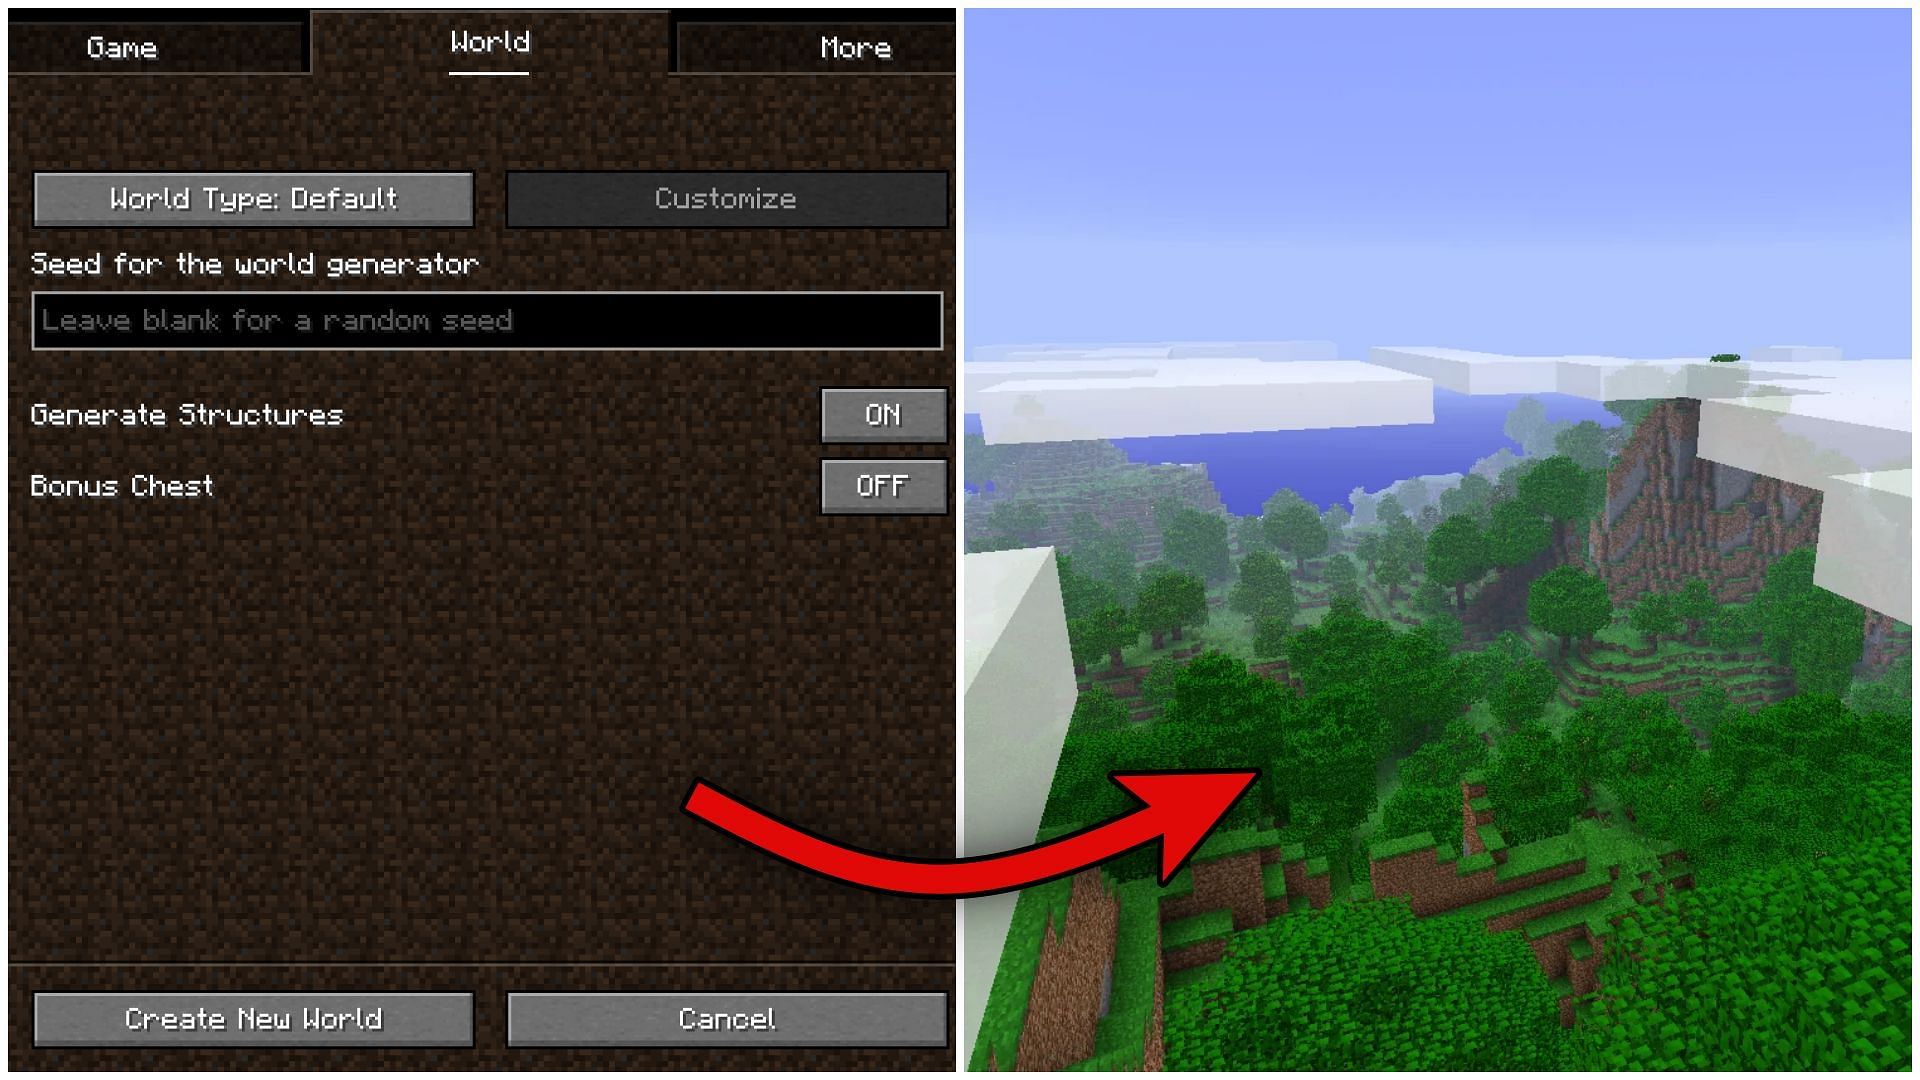 Minecraft players discuss how to find seed of a world from in-game pictures (Image via Mojang) 